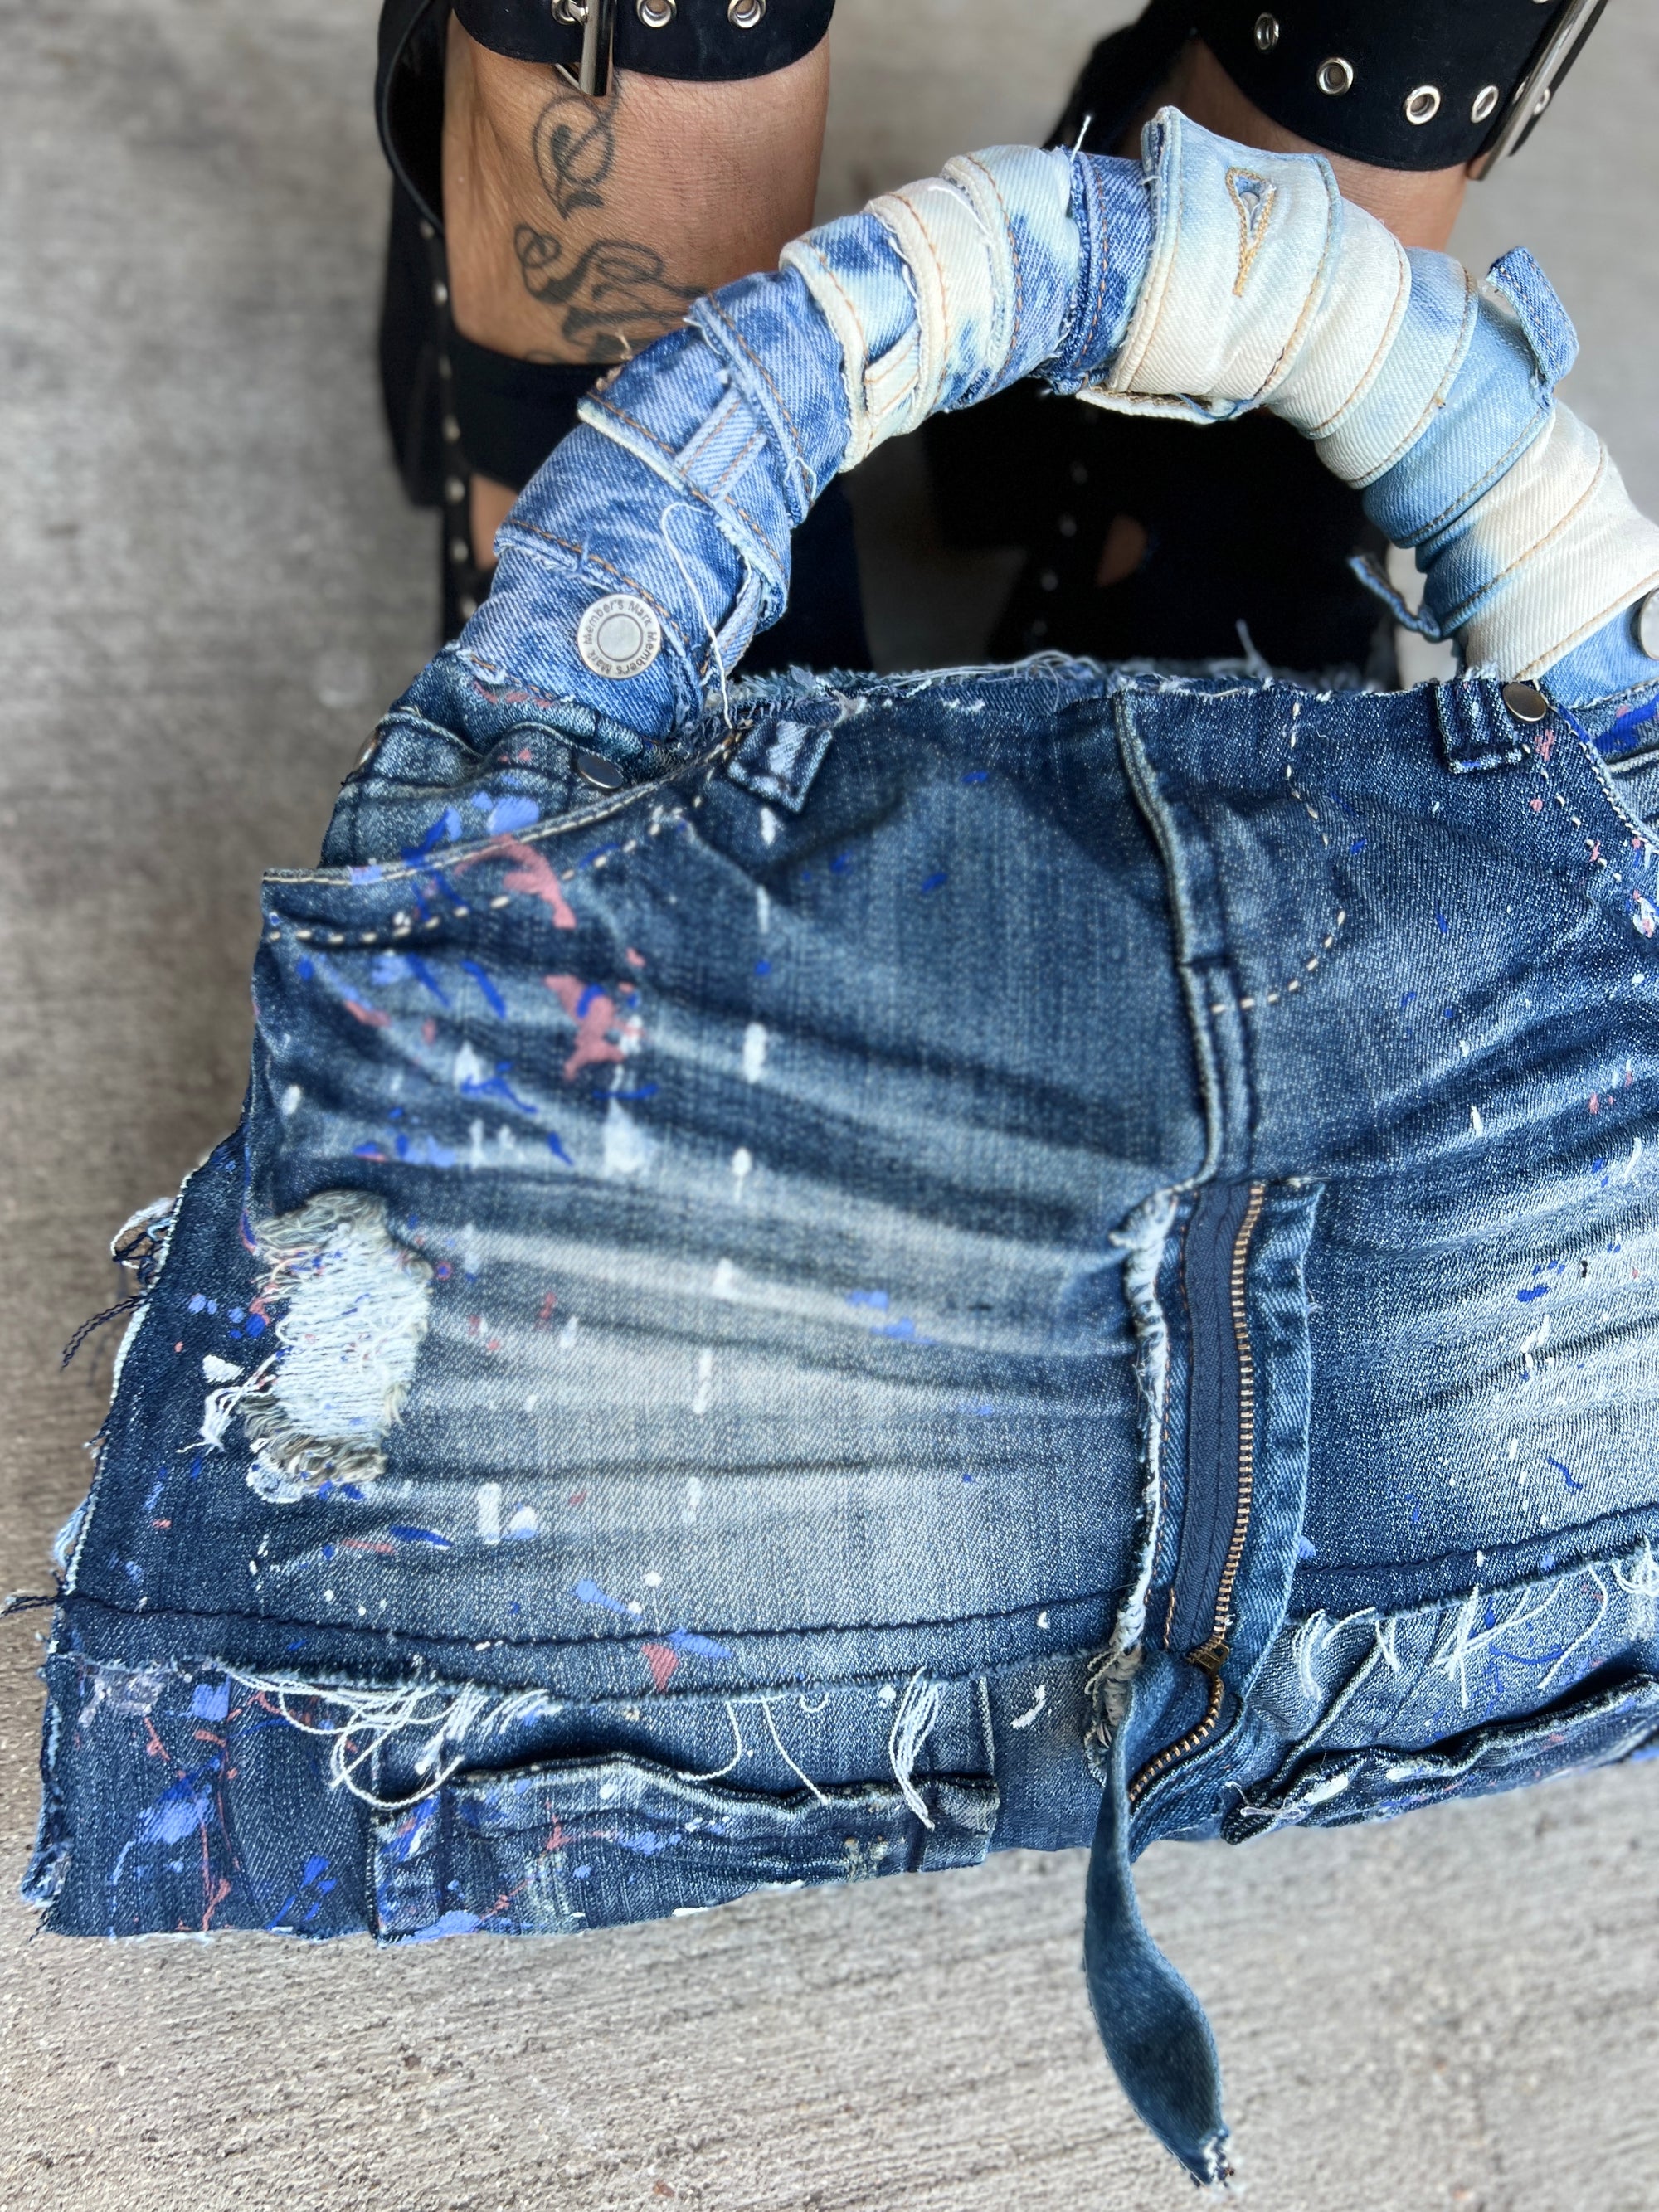 Ugly Denim Bag Collection Over The Top Picks - Funky Grunge Boutique